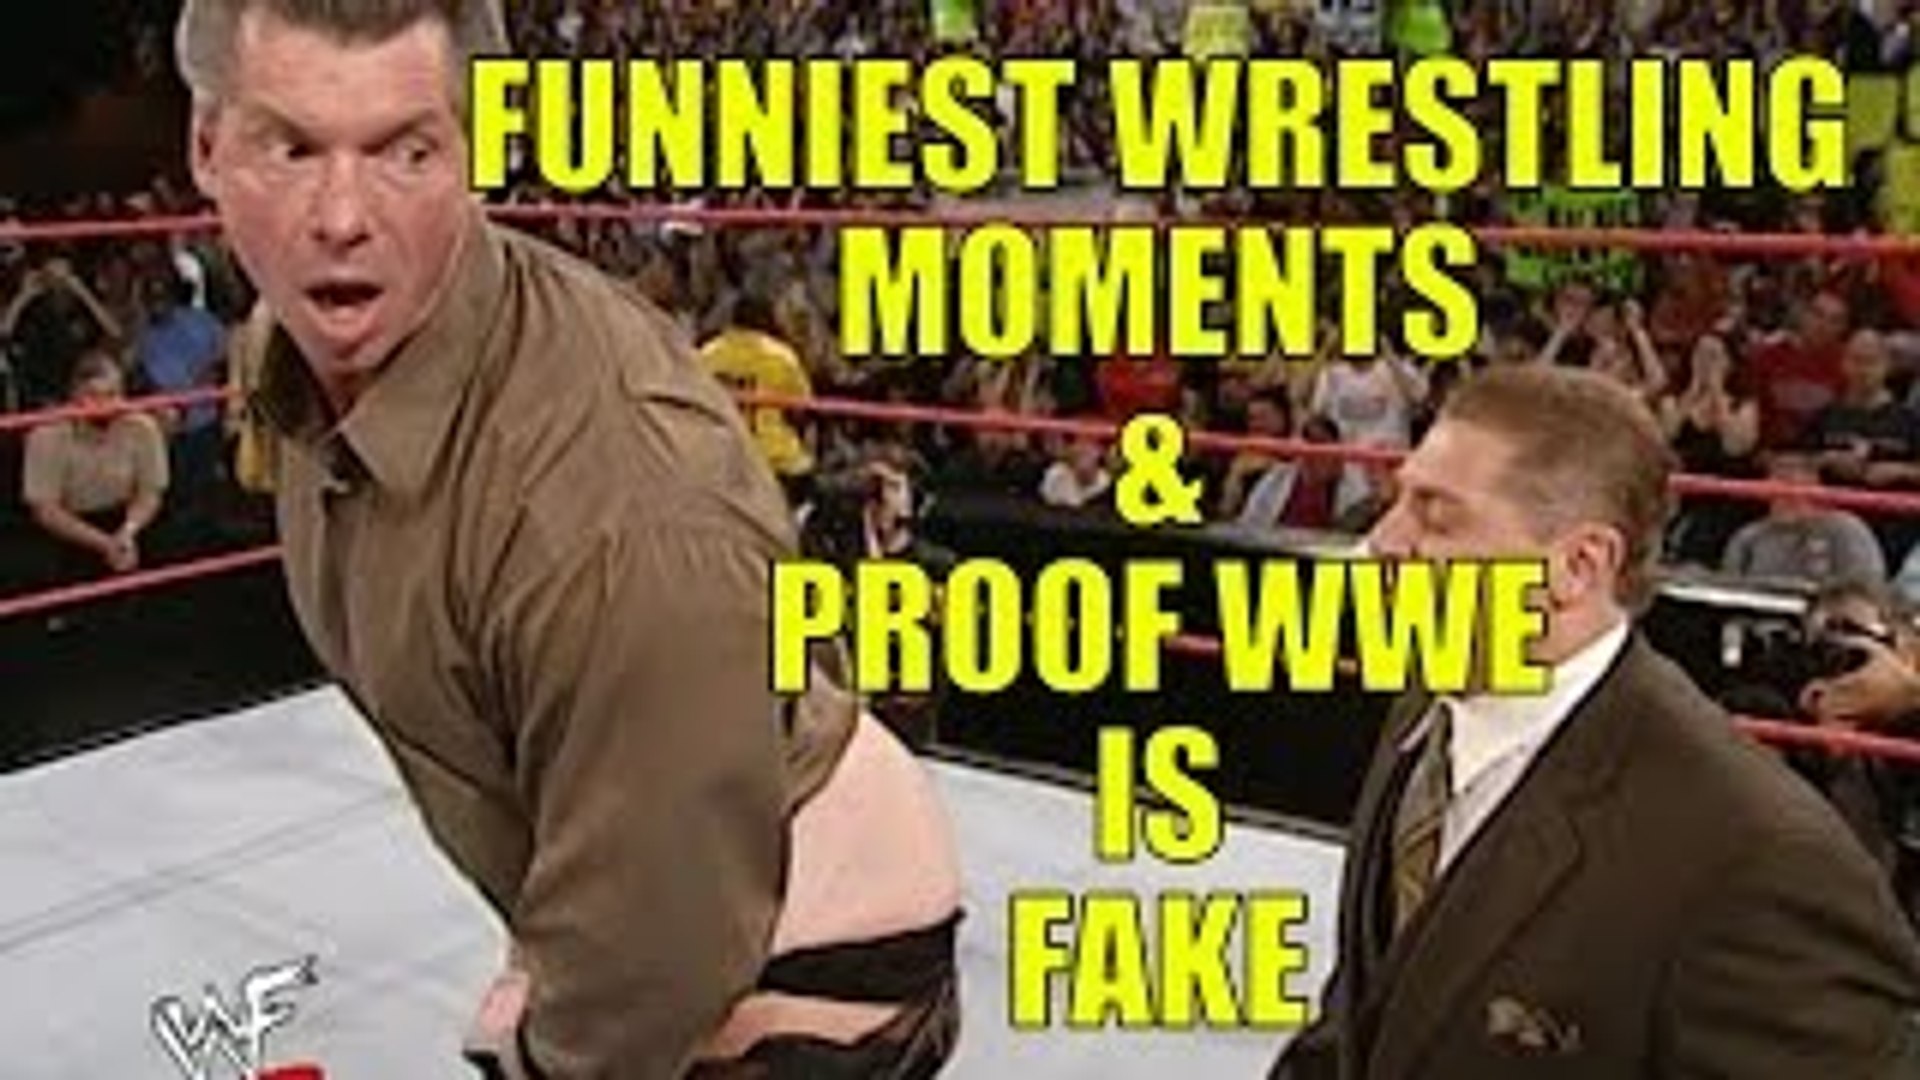 10 Perfect Proof WWE is FAKE - Funny WWE Video Clips - Funniest Wrestling  Moments - video Dailymotion